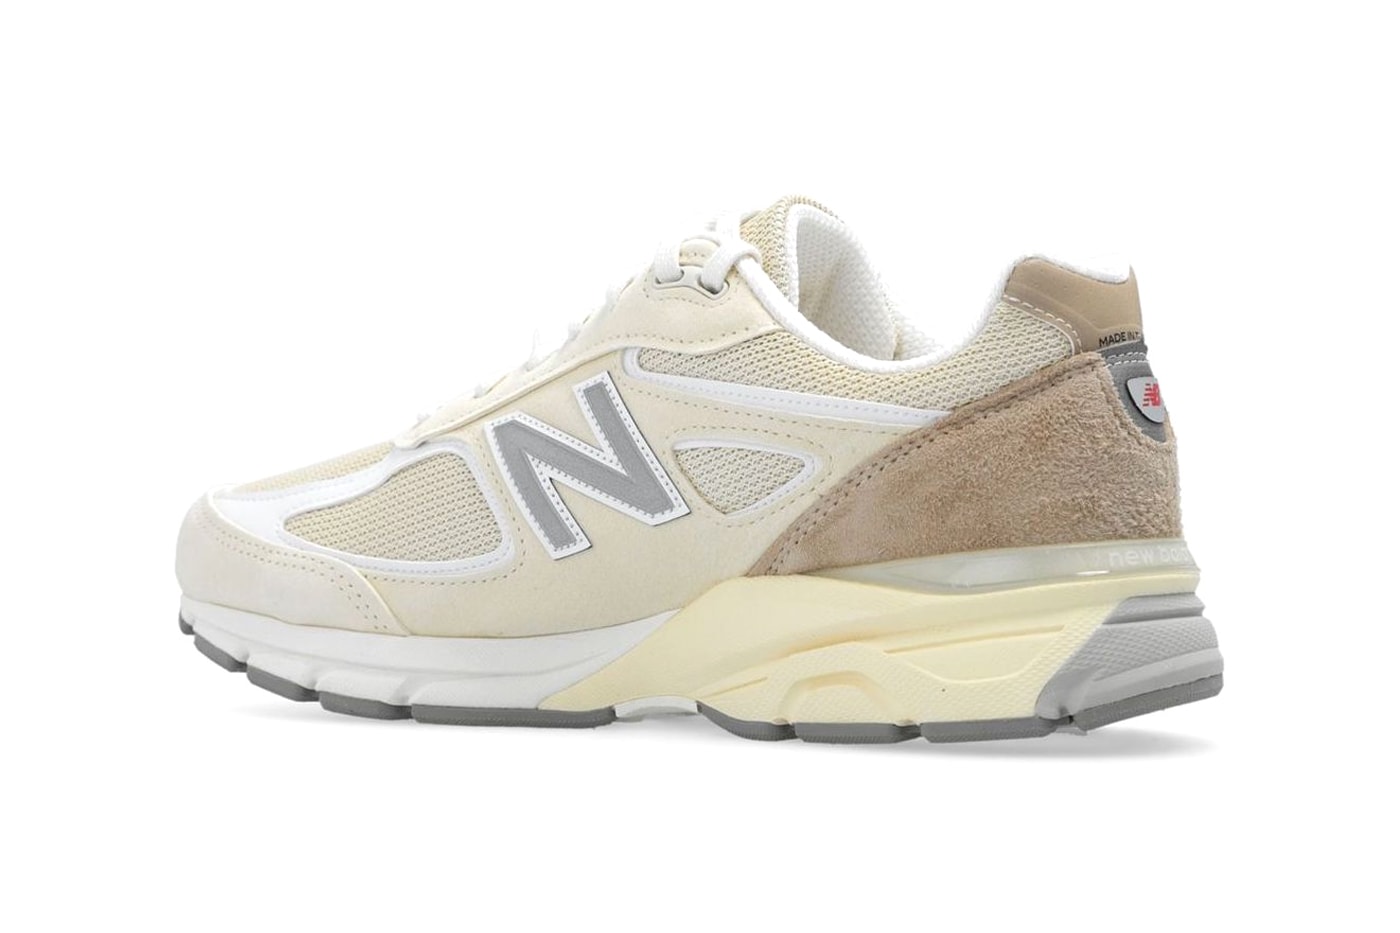 New Balance 990v4 Receives a Summer-Ready "Cream" Colorway U990TE4 made in usa boston teddy santis dad shoes sneakers 